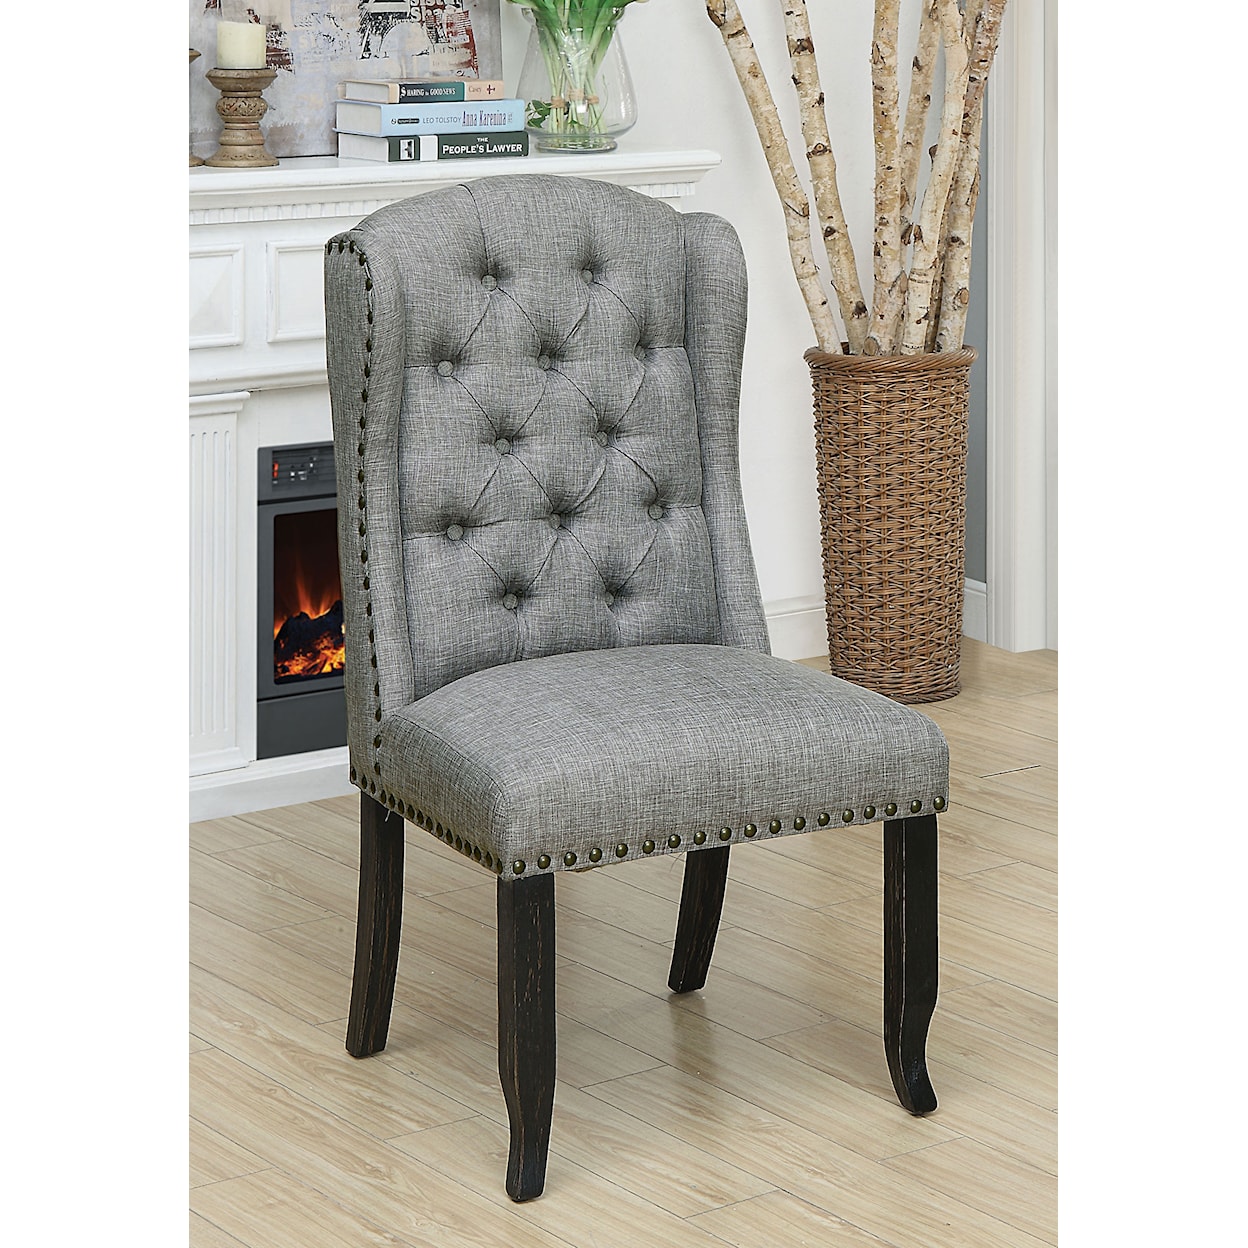 Furniture of America Sania III Wingback Upholstered Chair with Tufting